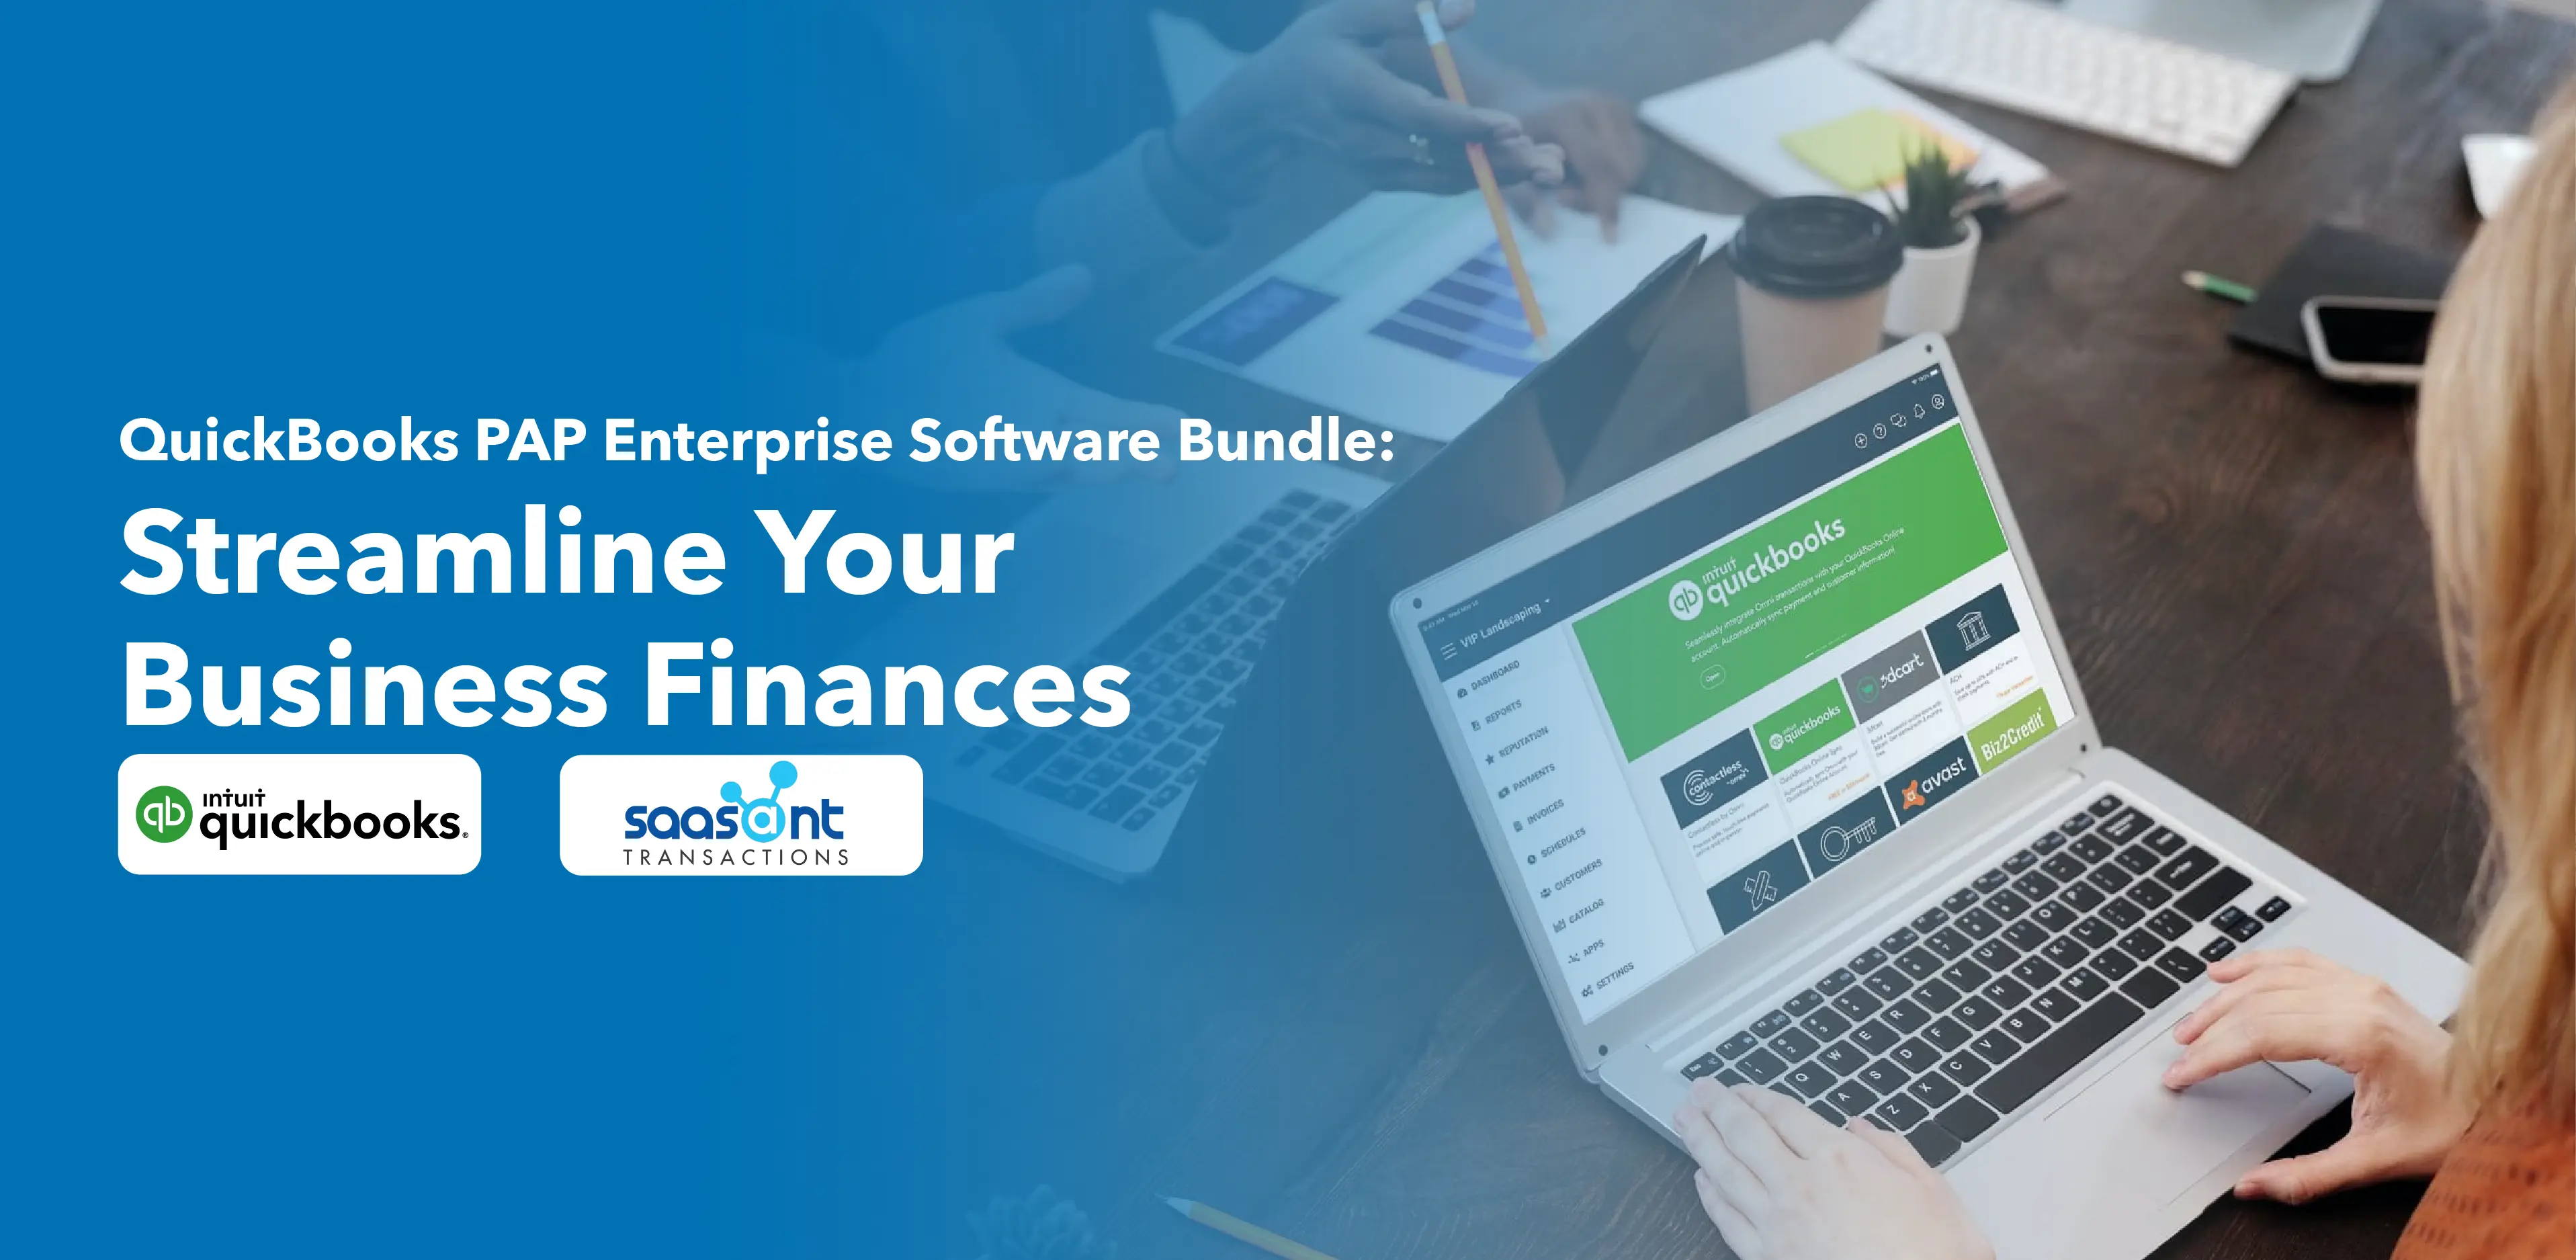 Master Your Business Finances with QuickBooks PAP Enterprise Software